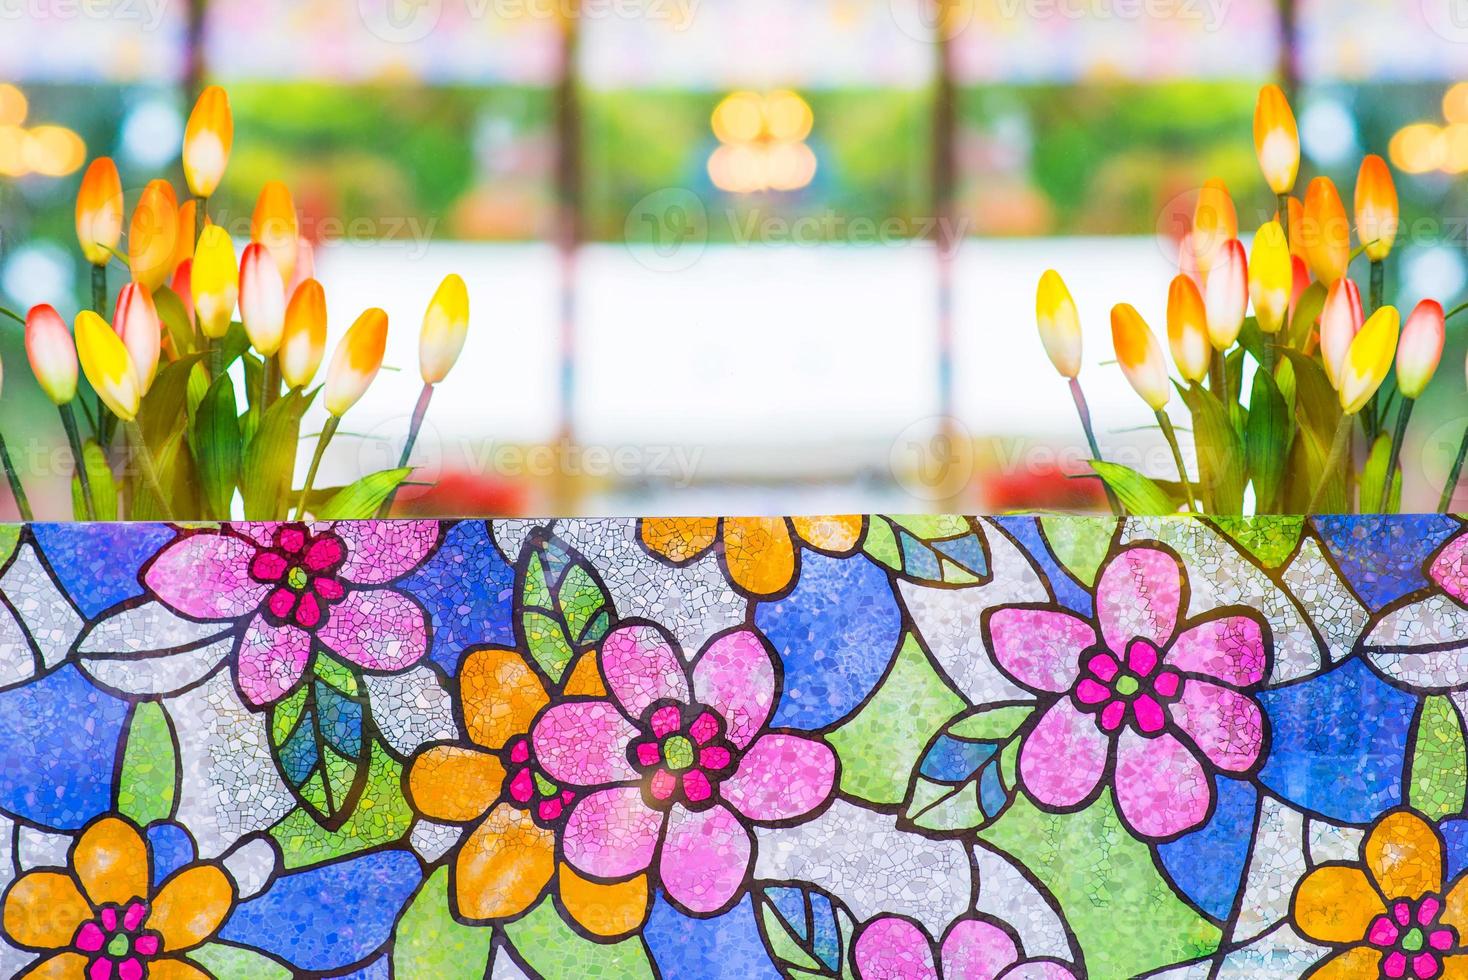 Image of a multicolored stained glass window photo